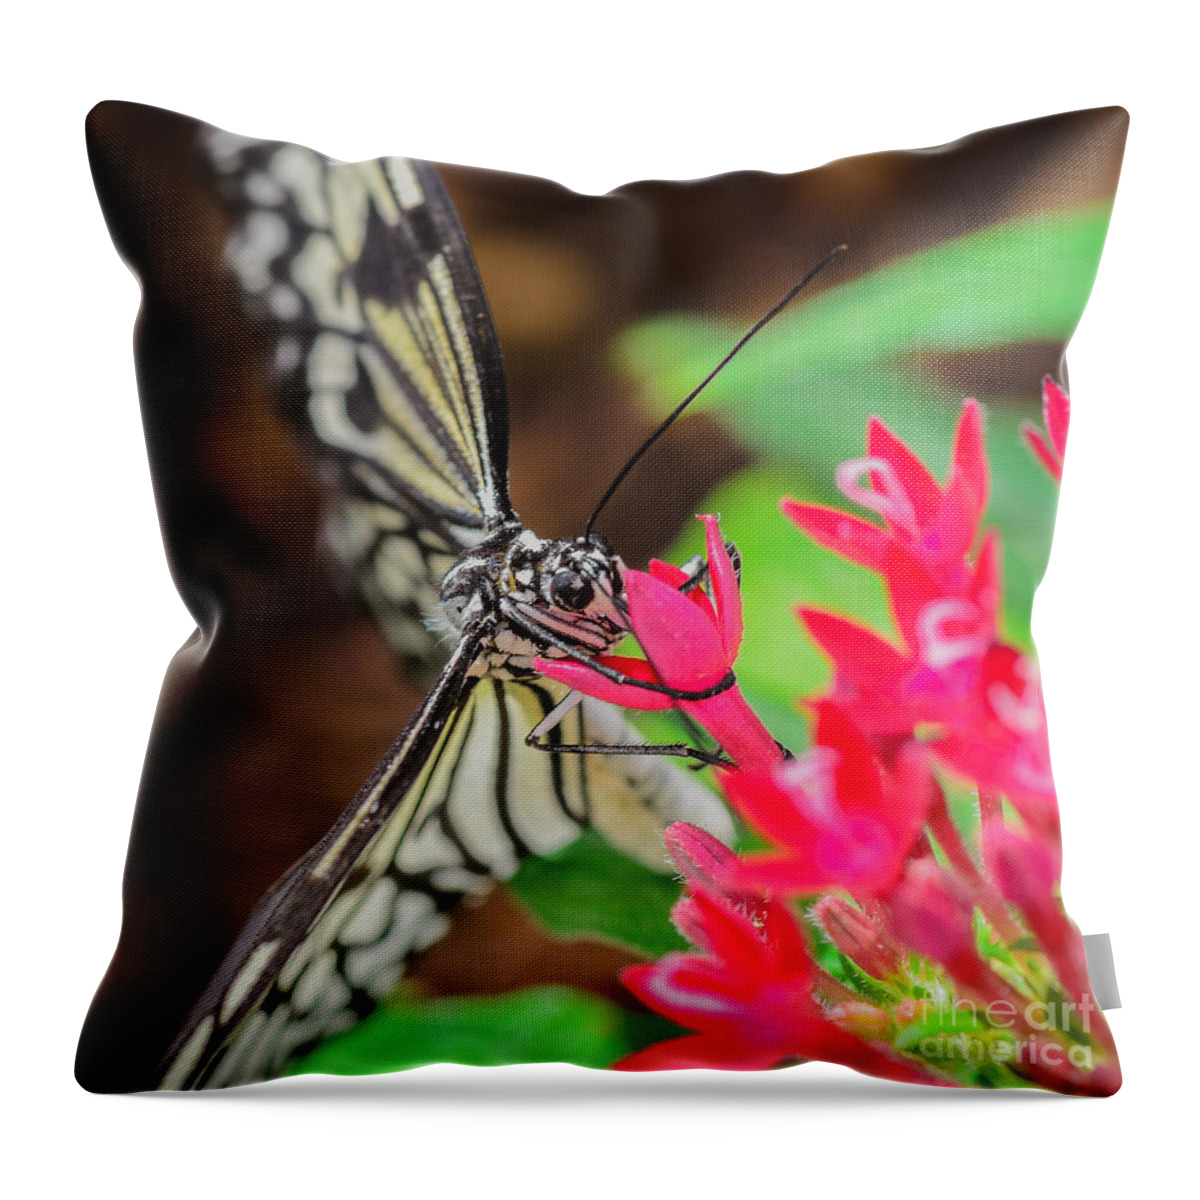 Butterfly On Flower Throw Pillow featuring the photograph Paper Kite Butterfly on Flower by Tamara Becker